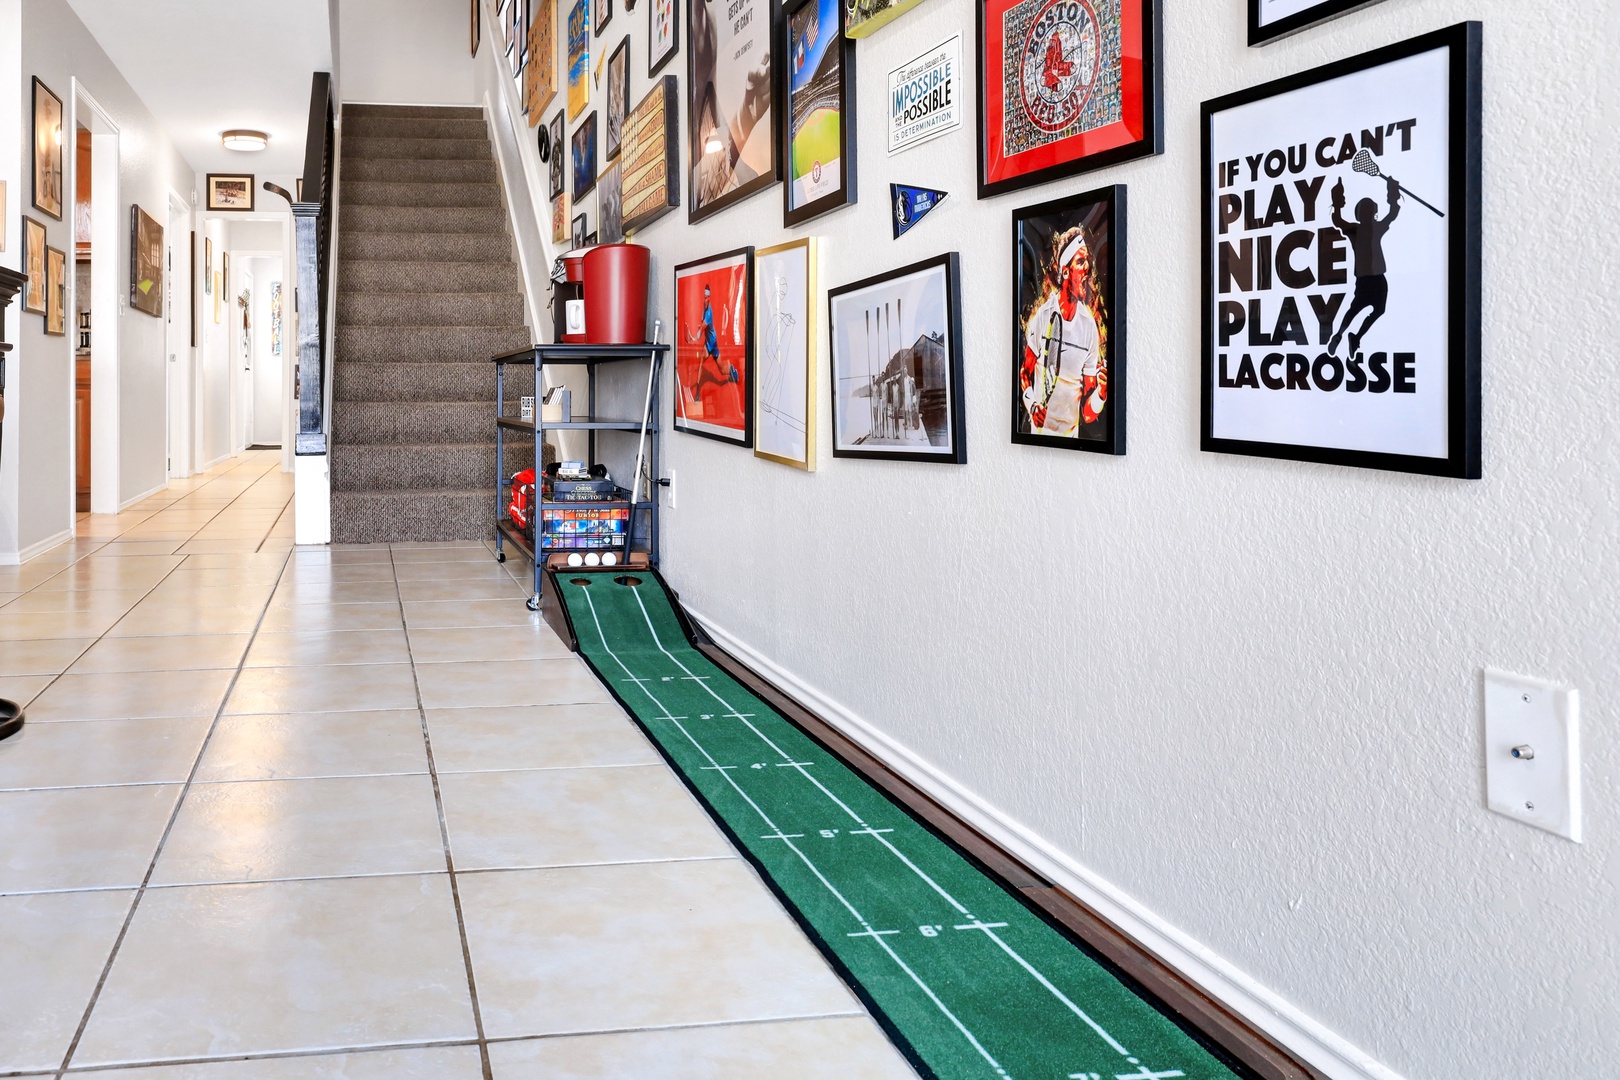 Golf, anyone? Practice your putt in the living room